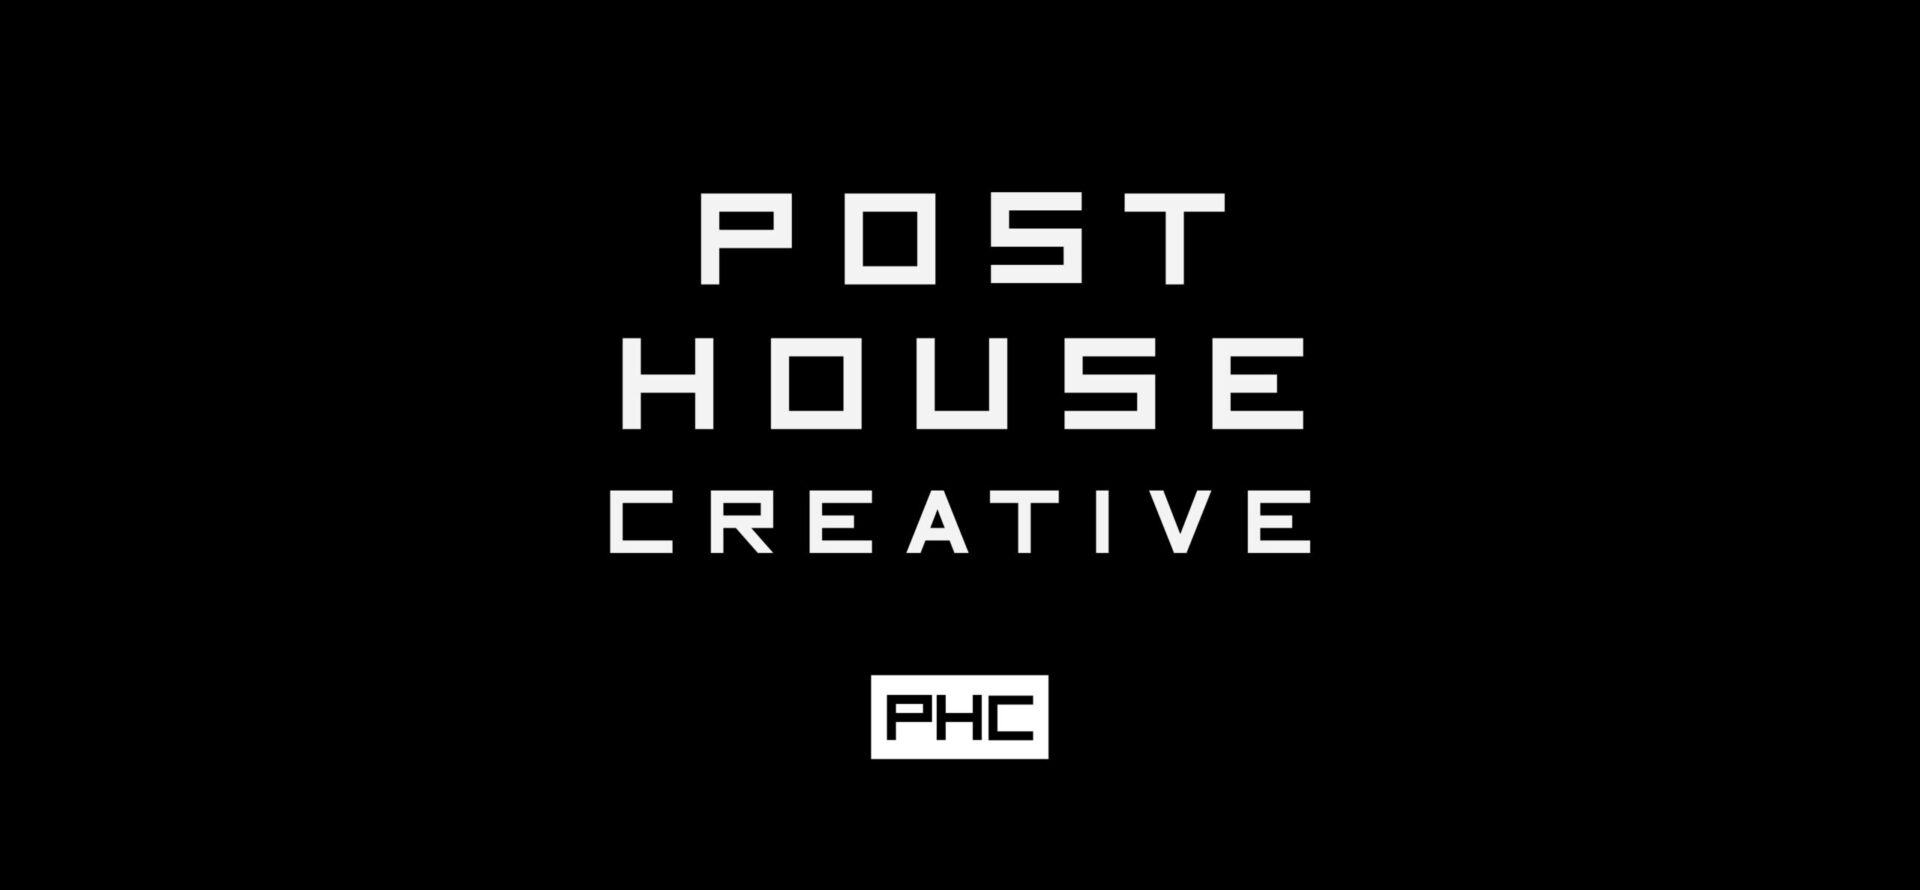 Post House Creative type with PHC logo